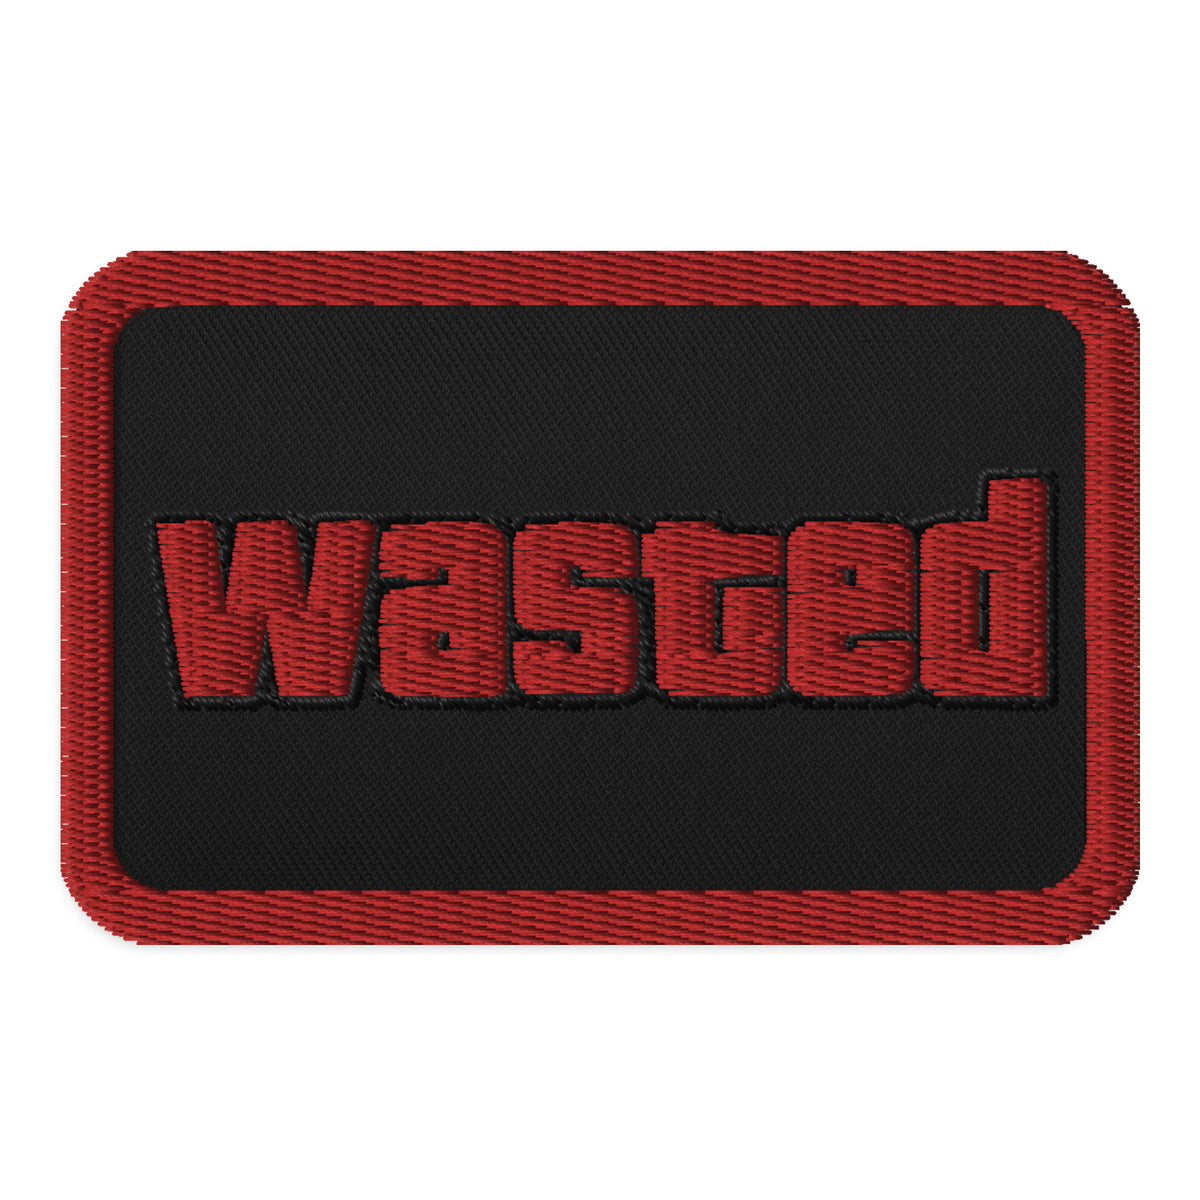 Wasted Embroidered Patch